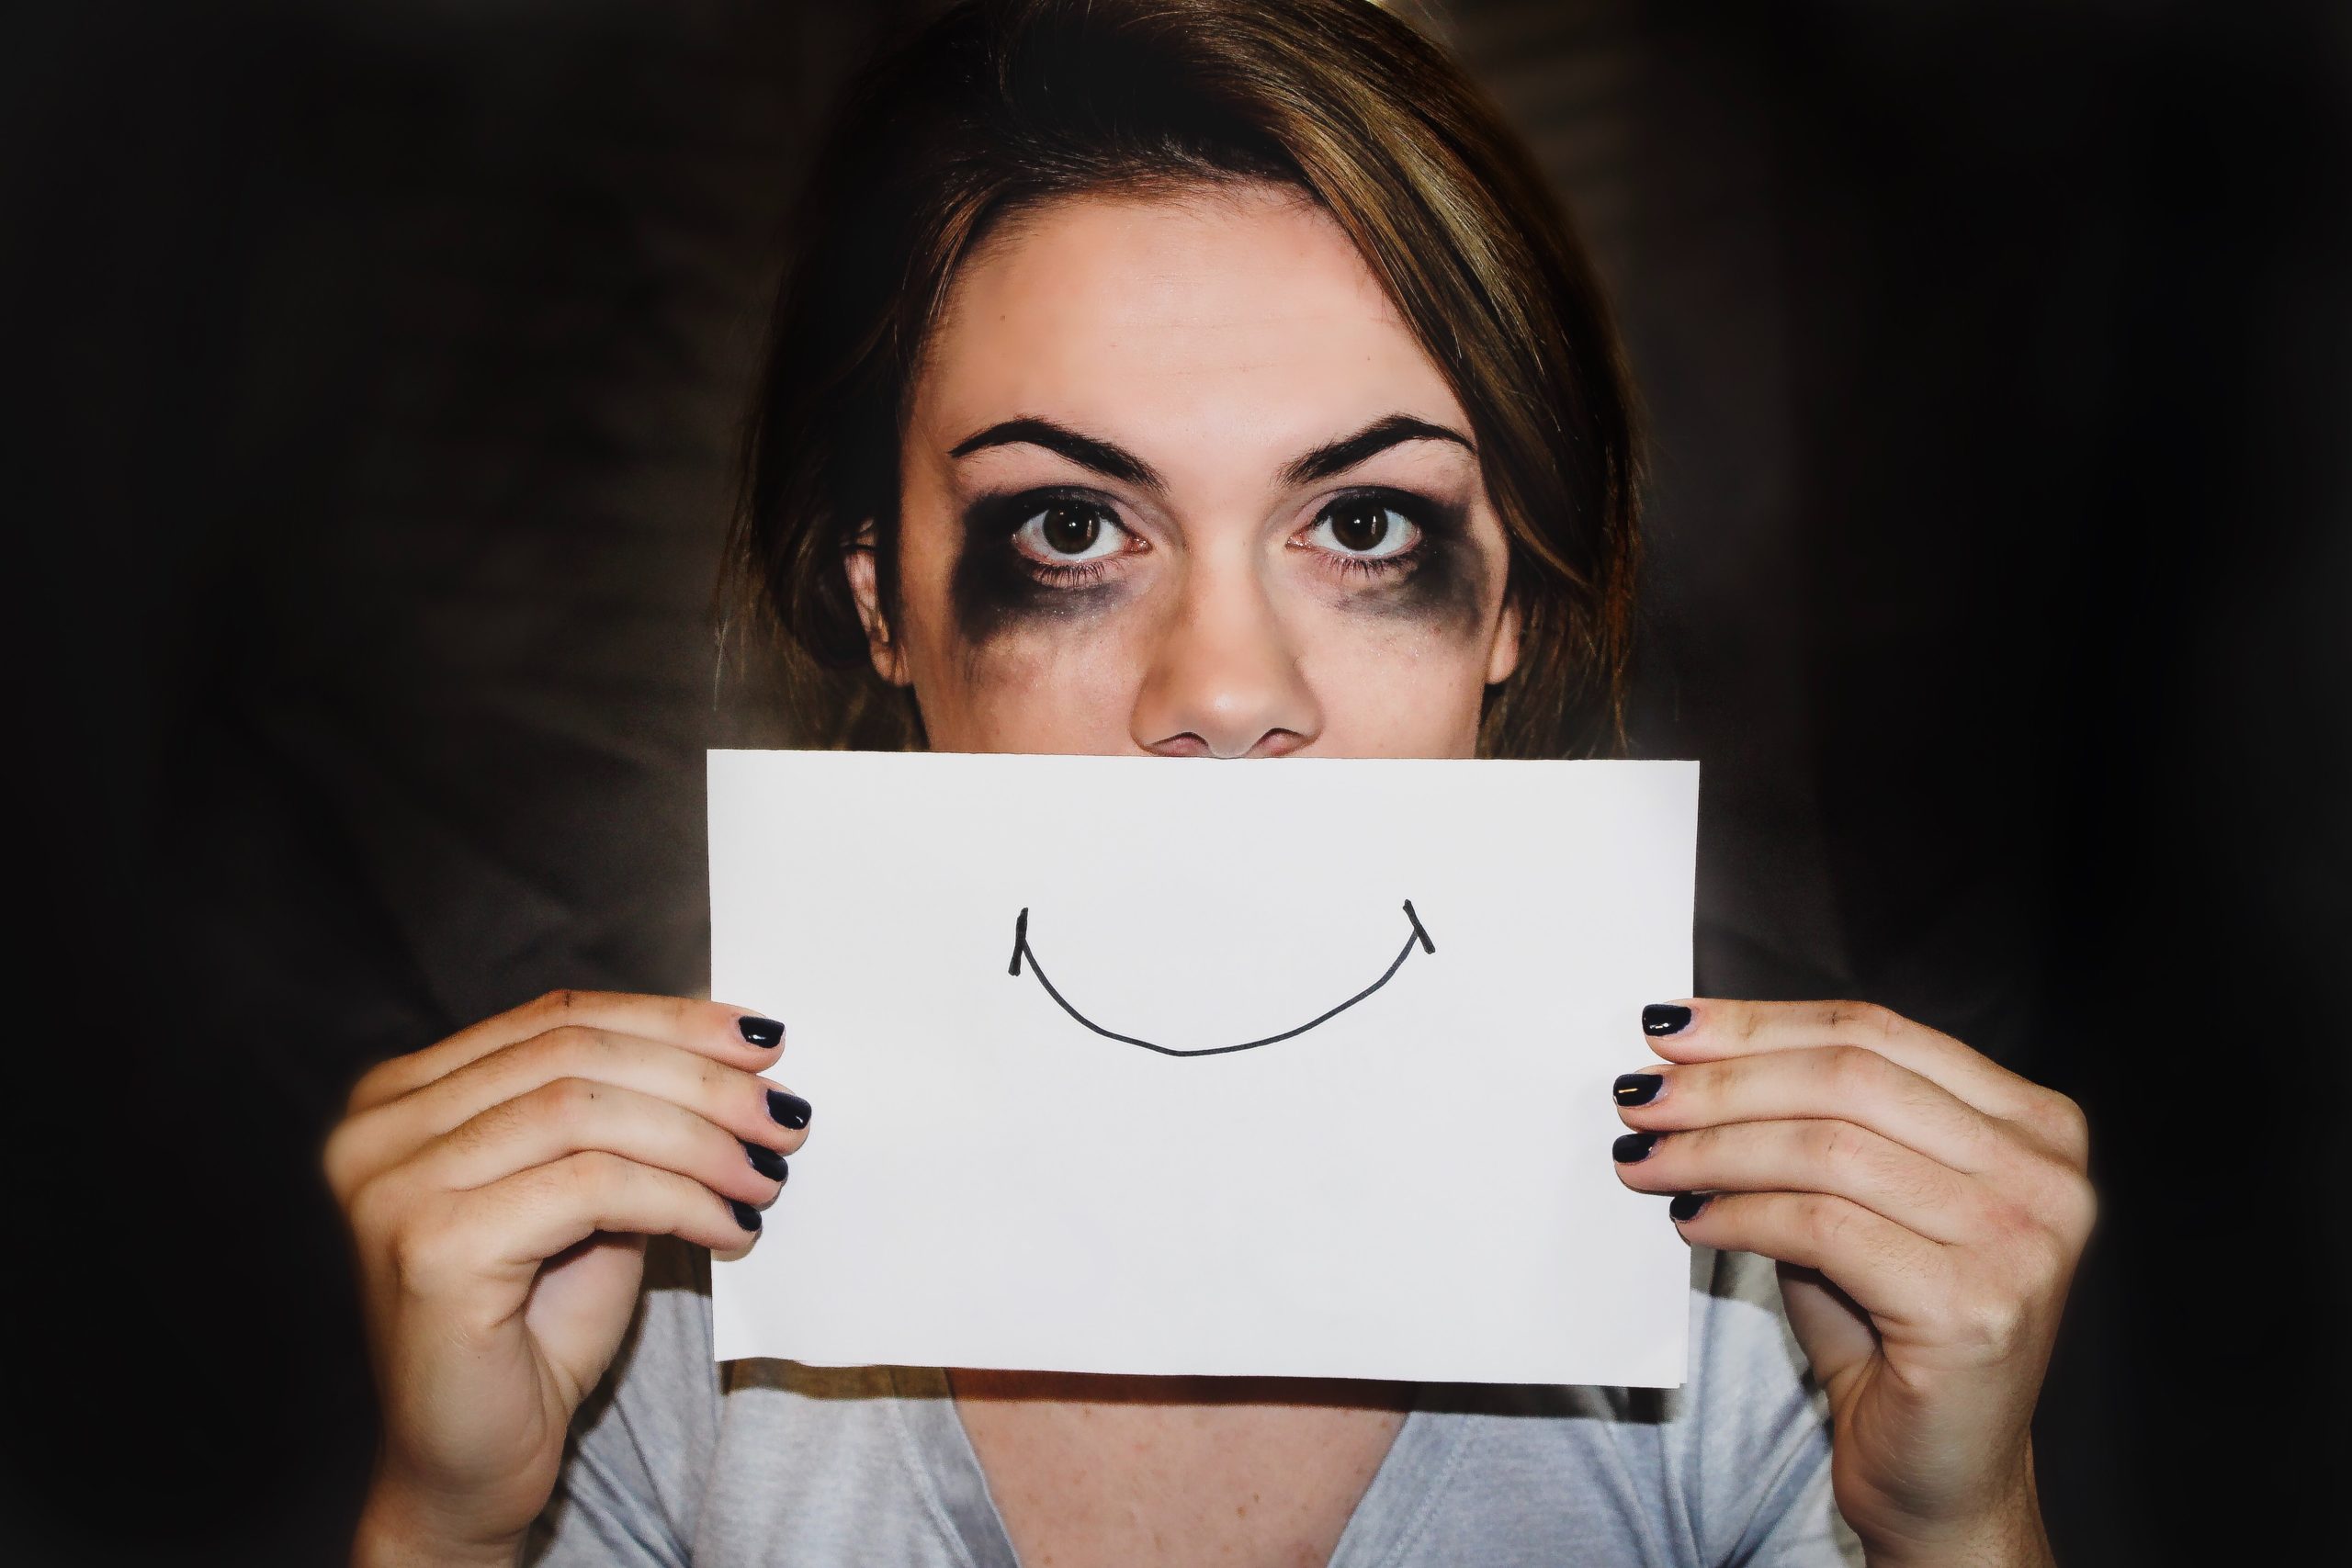 Woman with eye makeup smudged from crying holding up a smiley face paper over her mouth